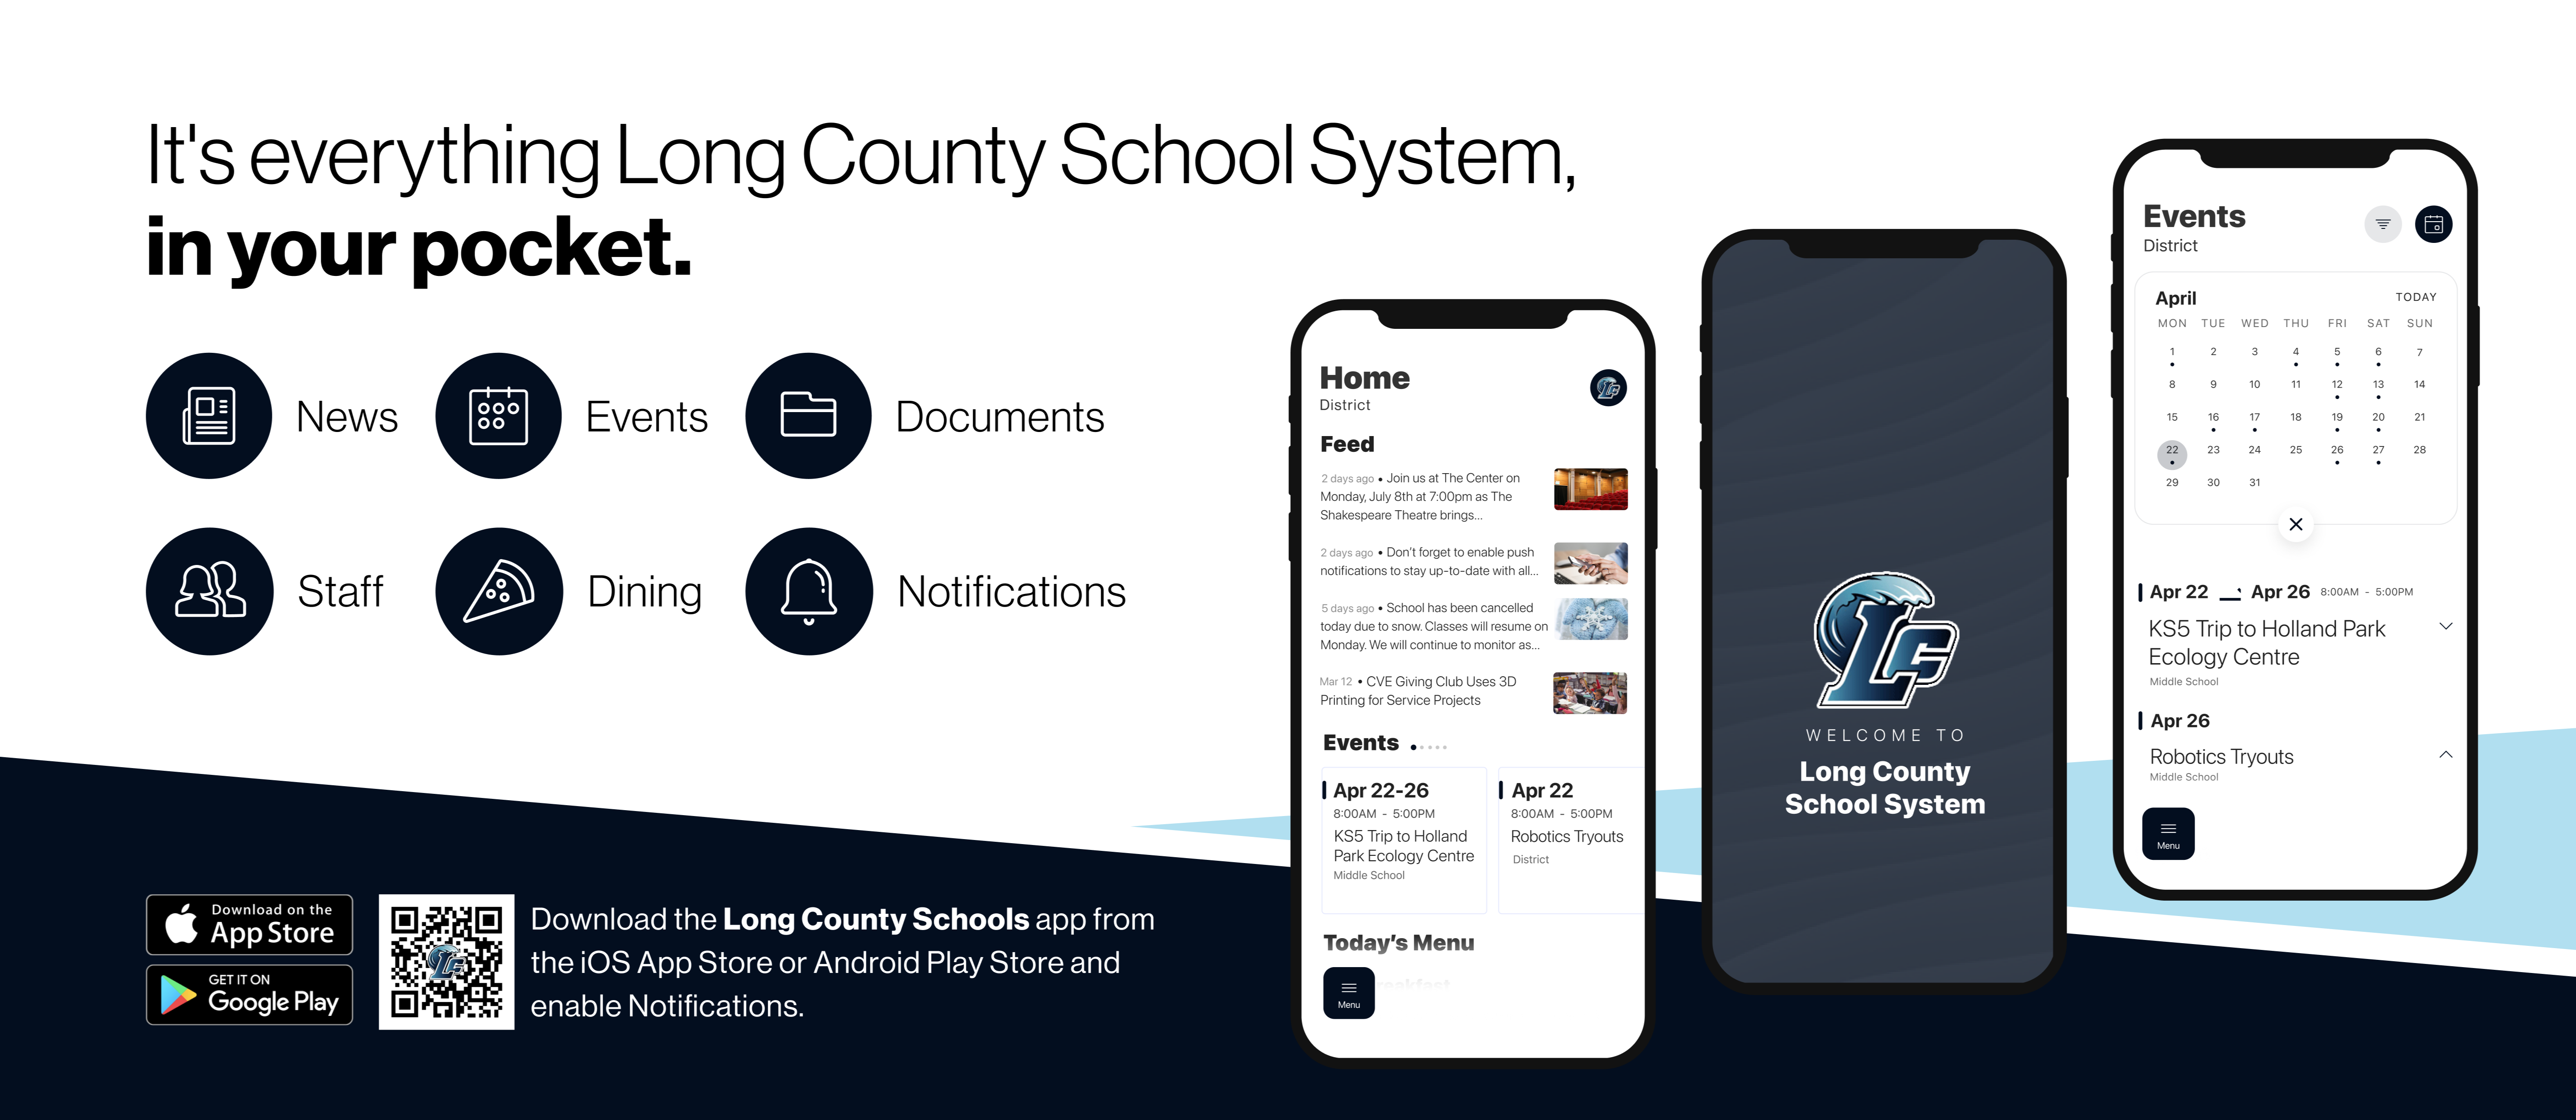 everything long county schools i n your pocket - download the app